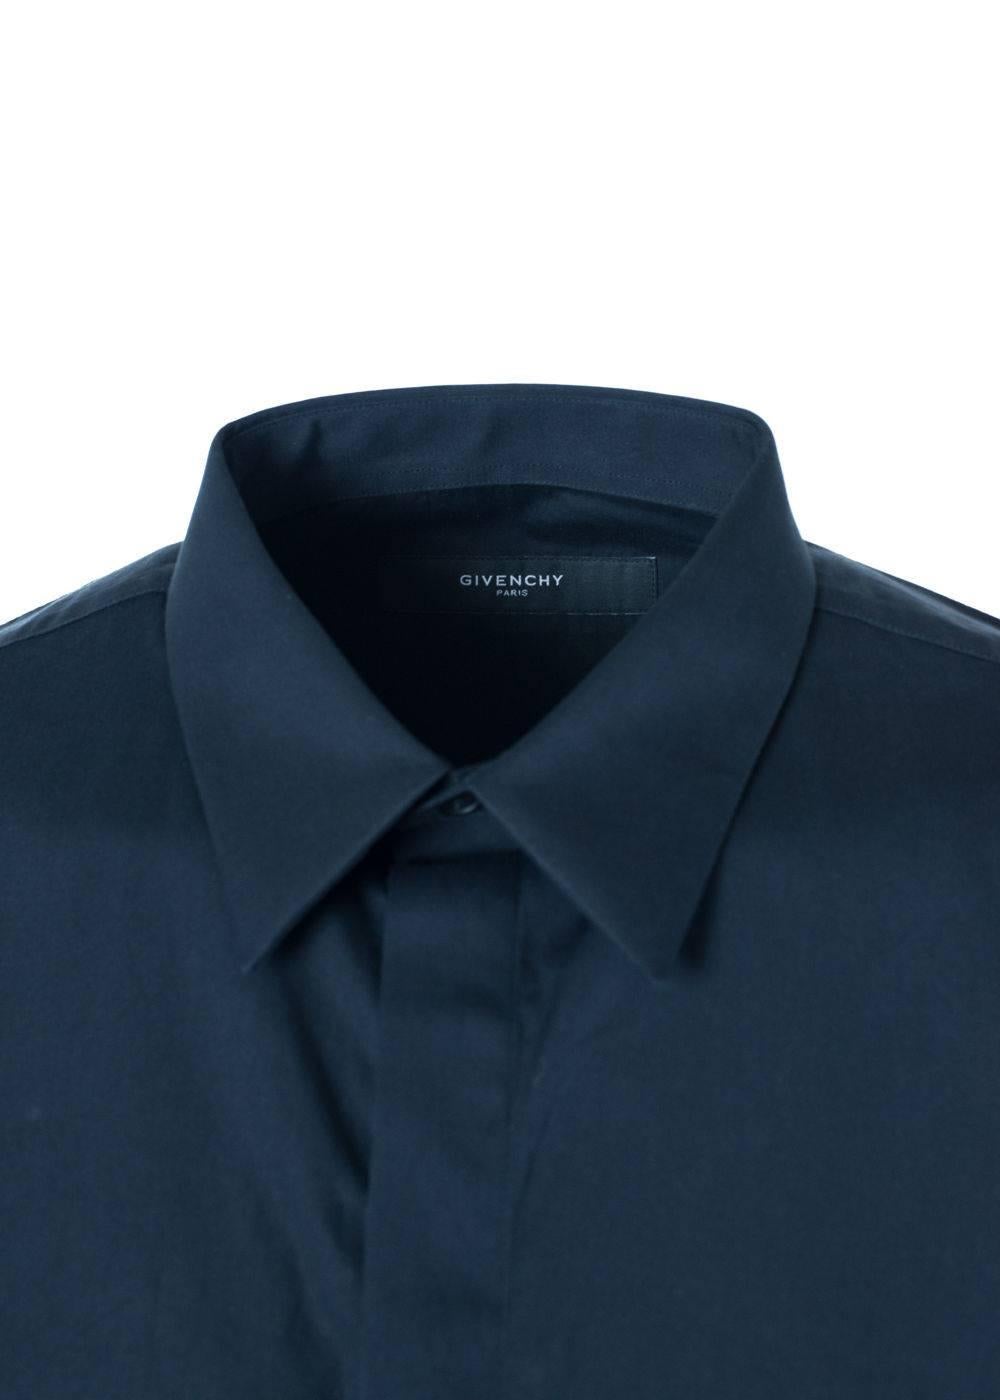 Brand New Givenchy Men's Button Down
Original Tags
Retails in Stores & Online for $695
Men's Size E42 / US16.5 (XXS) Fits True to Size

Every man needs a classic Dark navy button down for those professional settings or dressy outings. This Givenchy